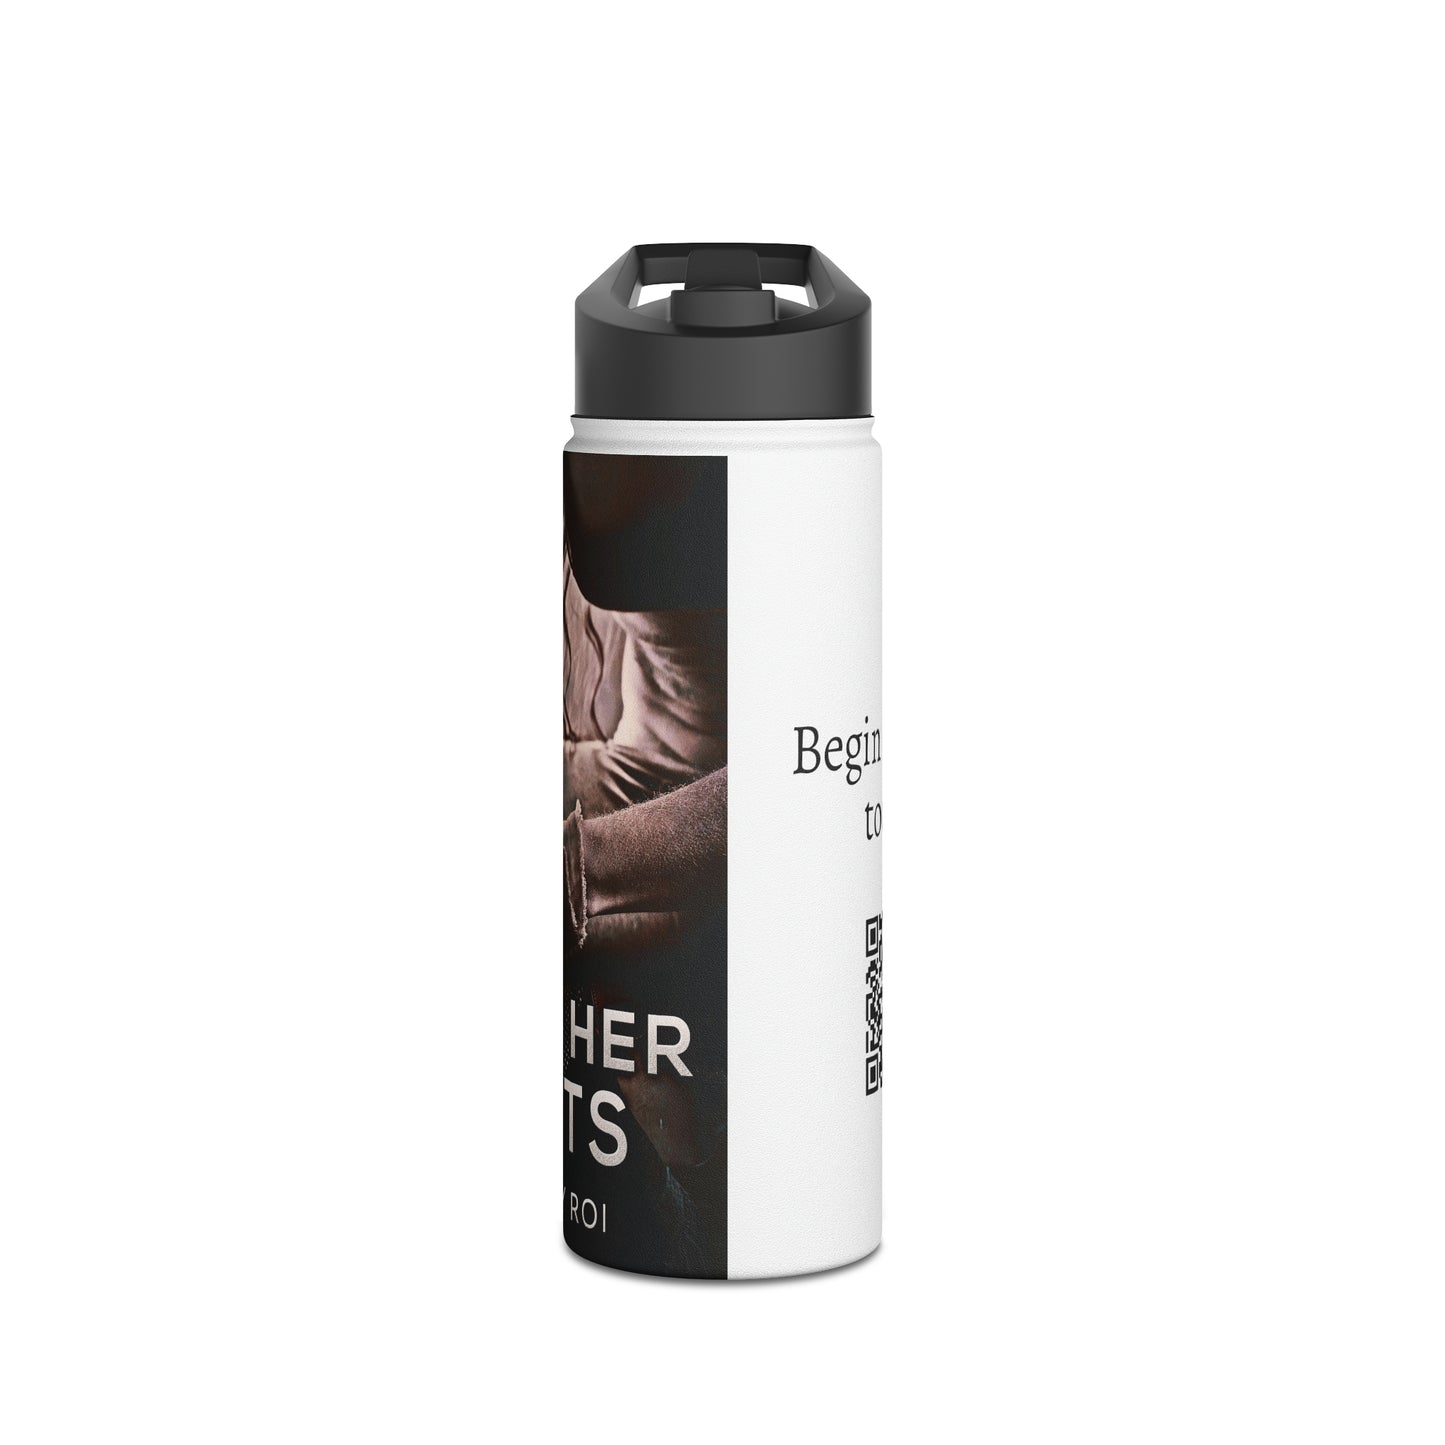 With Her Fists - Stainless Steel Water Bottle